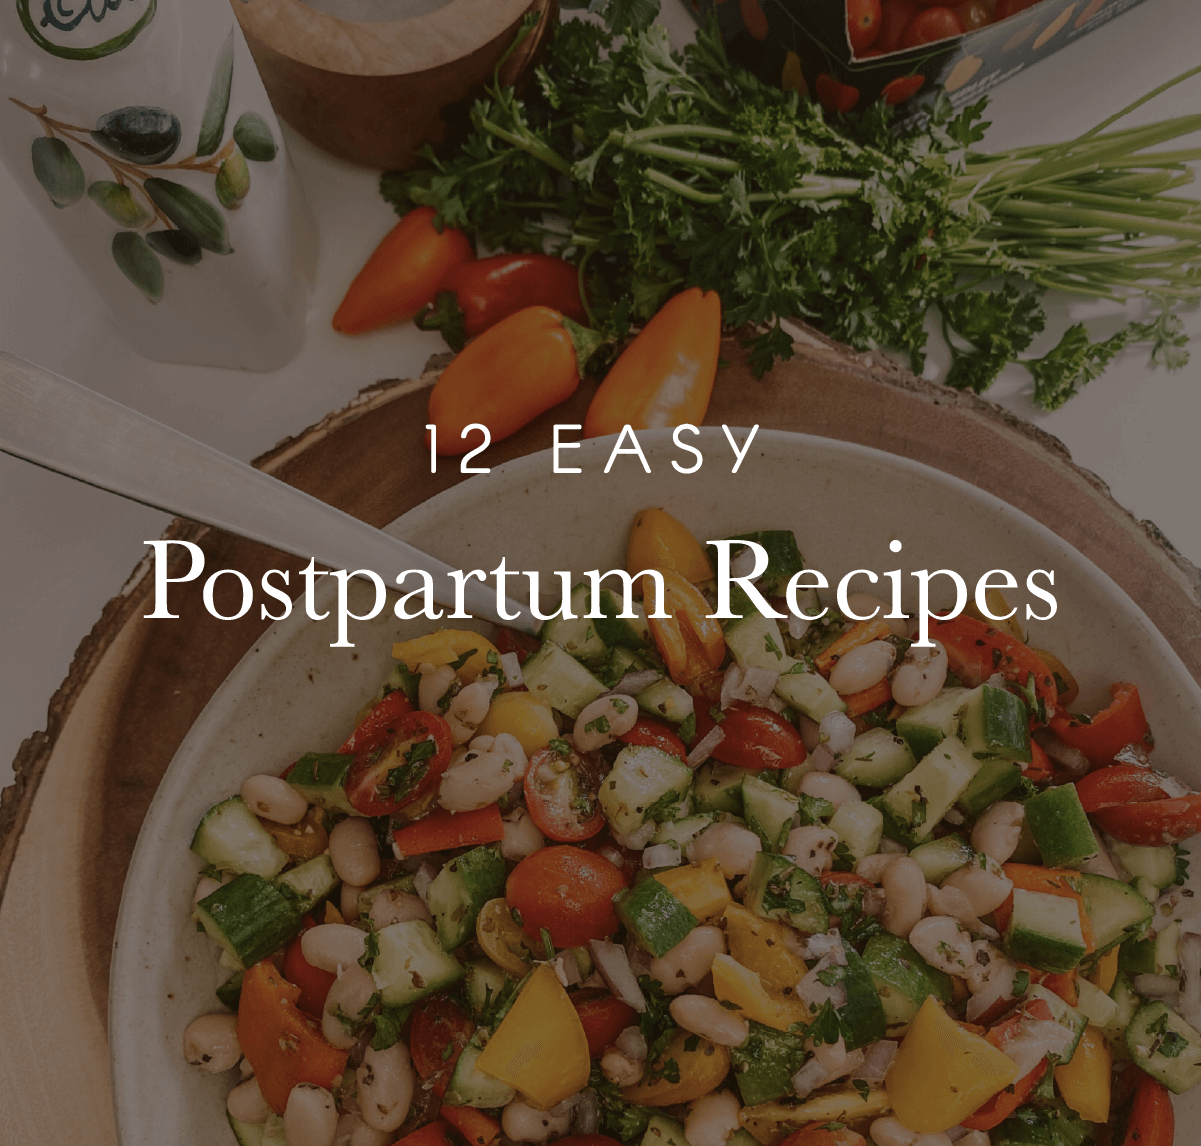 Best Foods For Postpartum: The Top 8 Nutrient-Rich Options for New